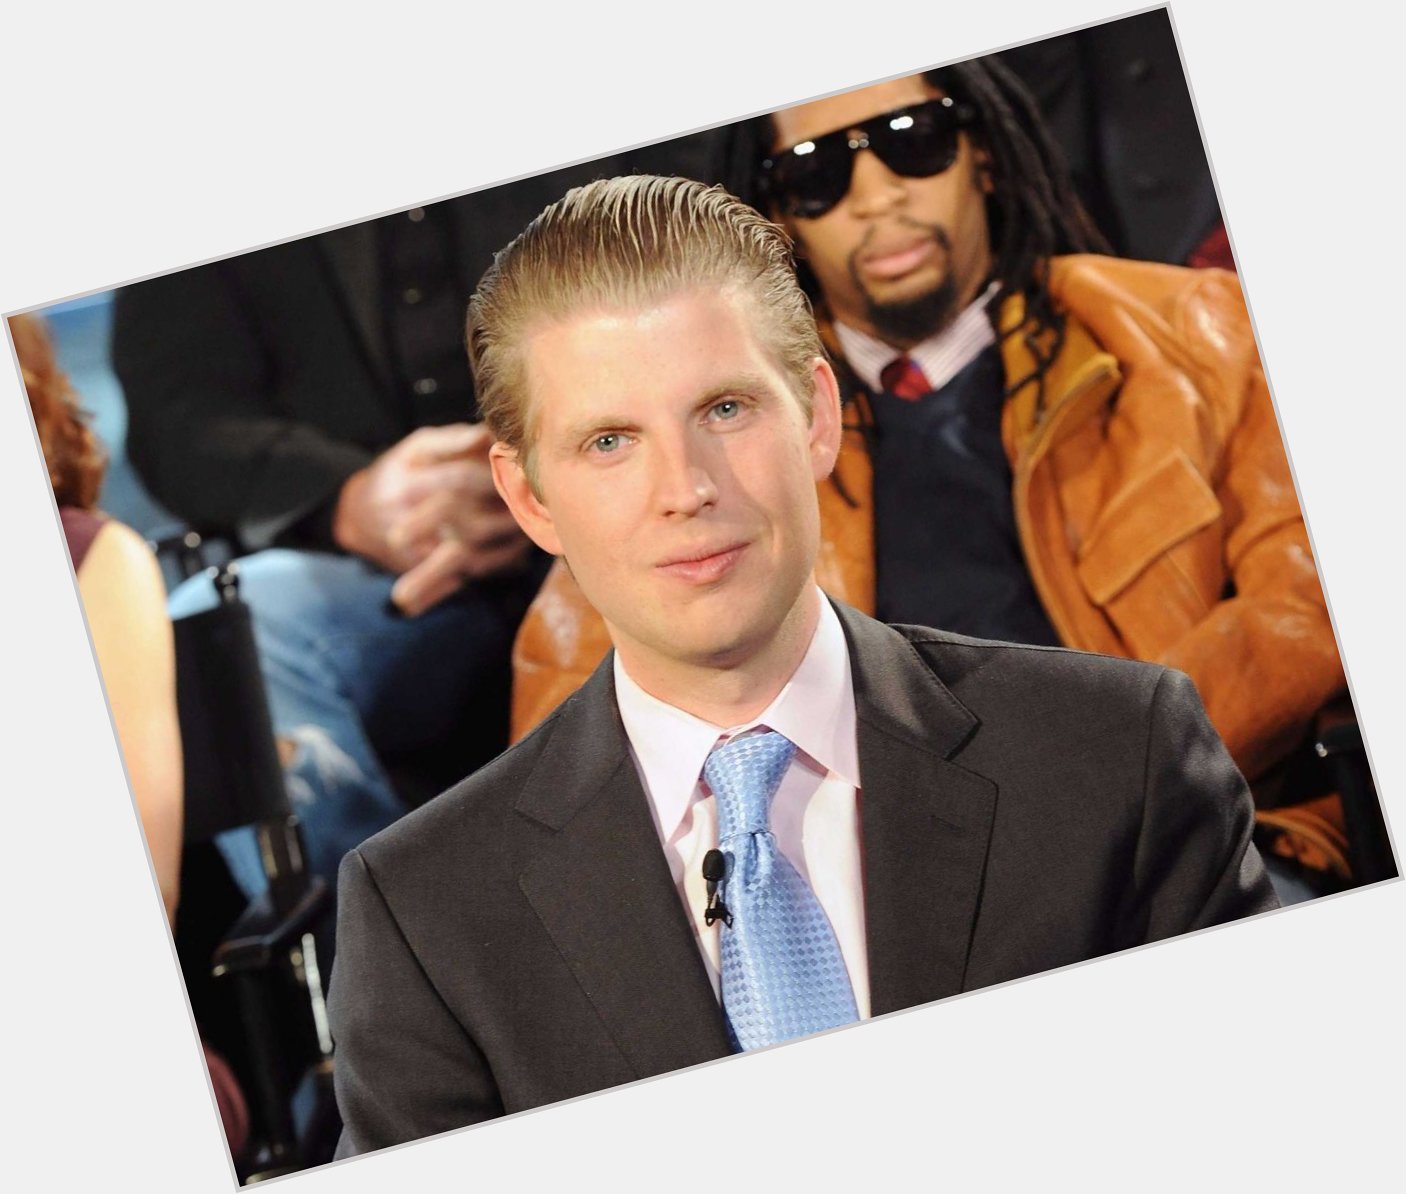 Happy either 16th or 5,000th birthday, Eric Trump 